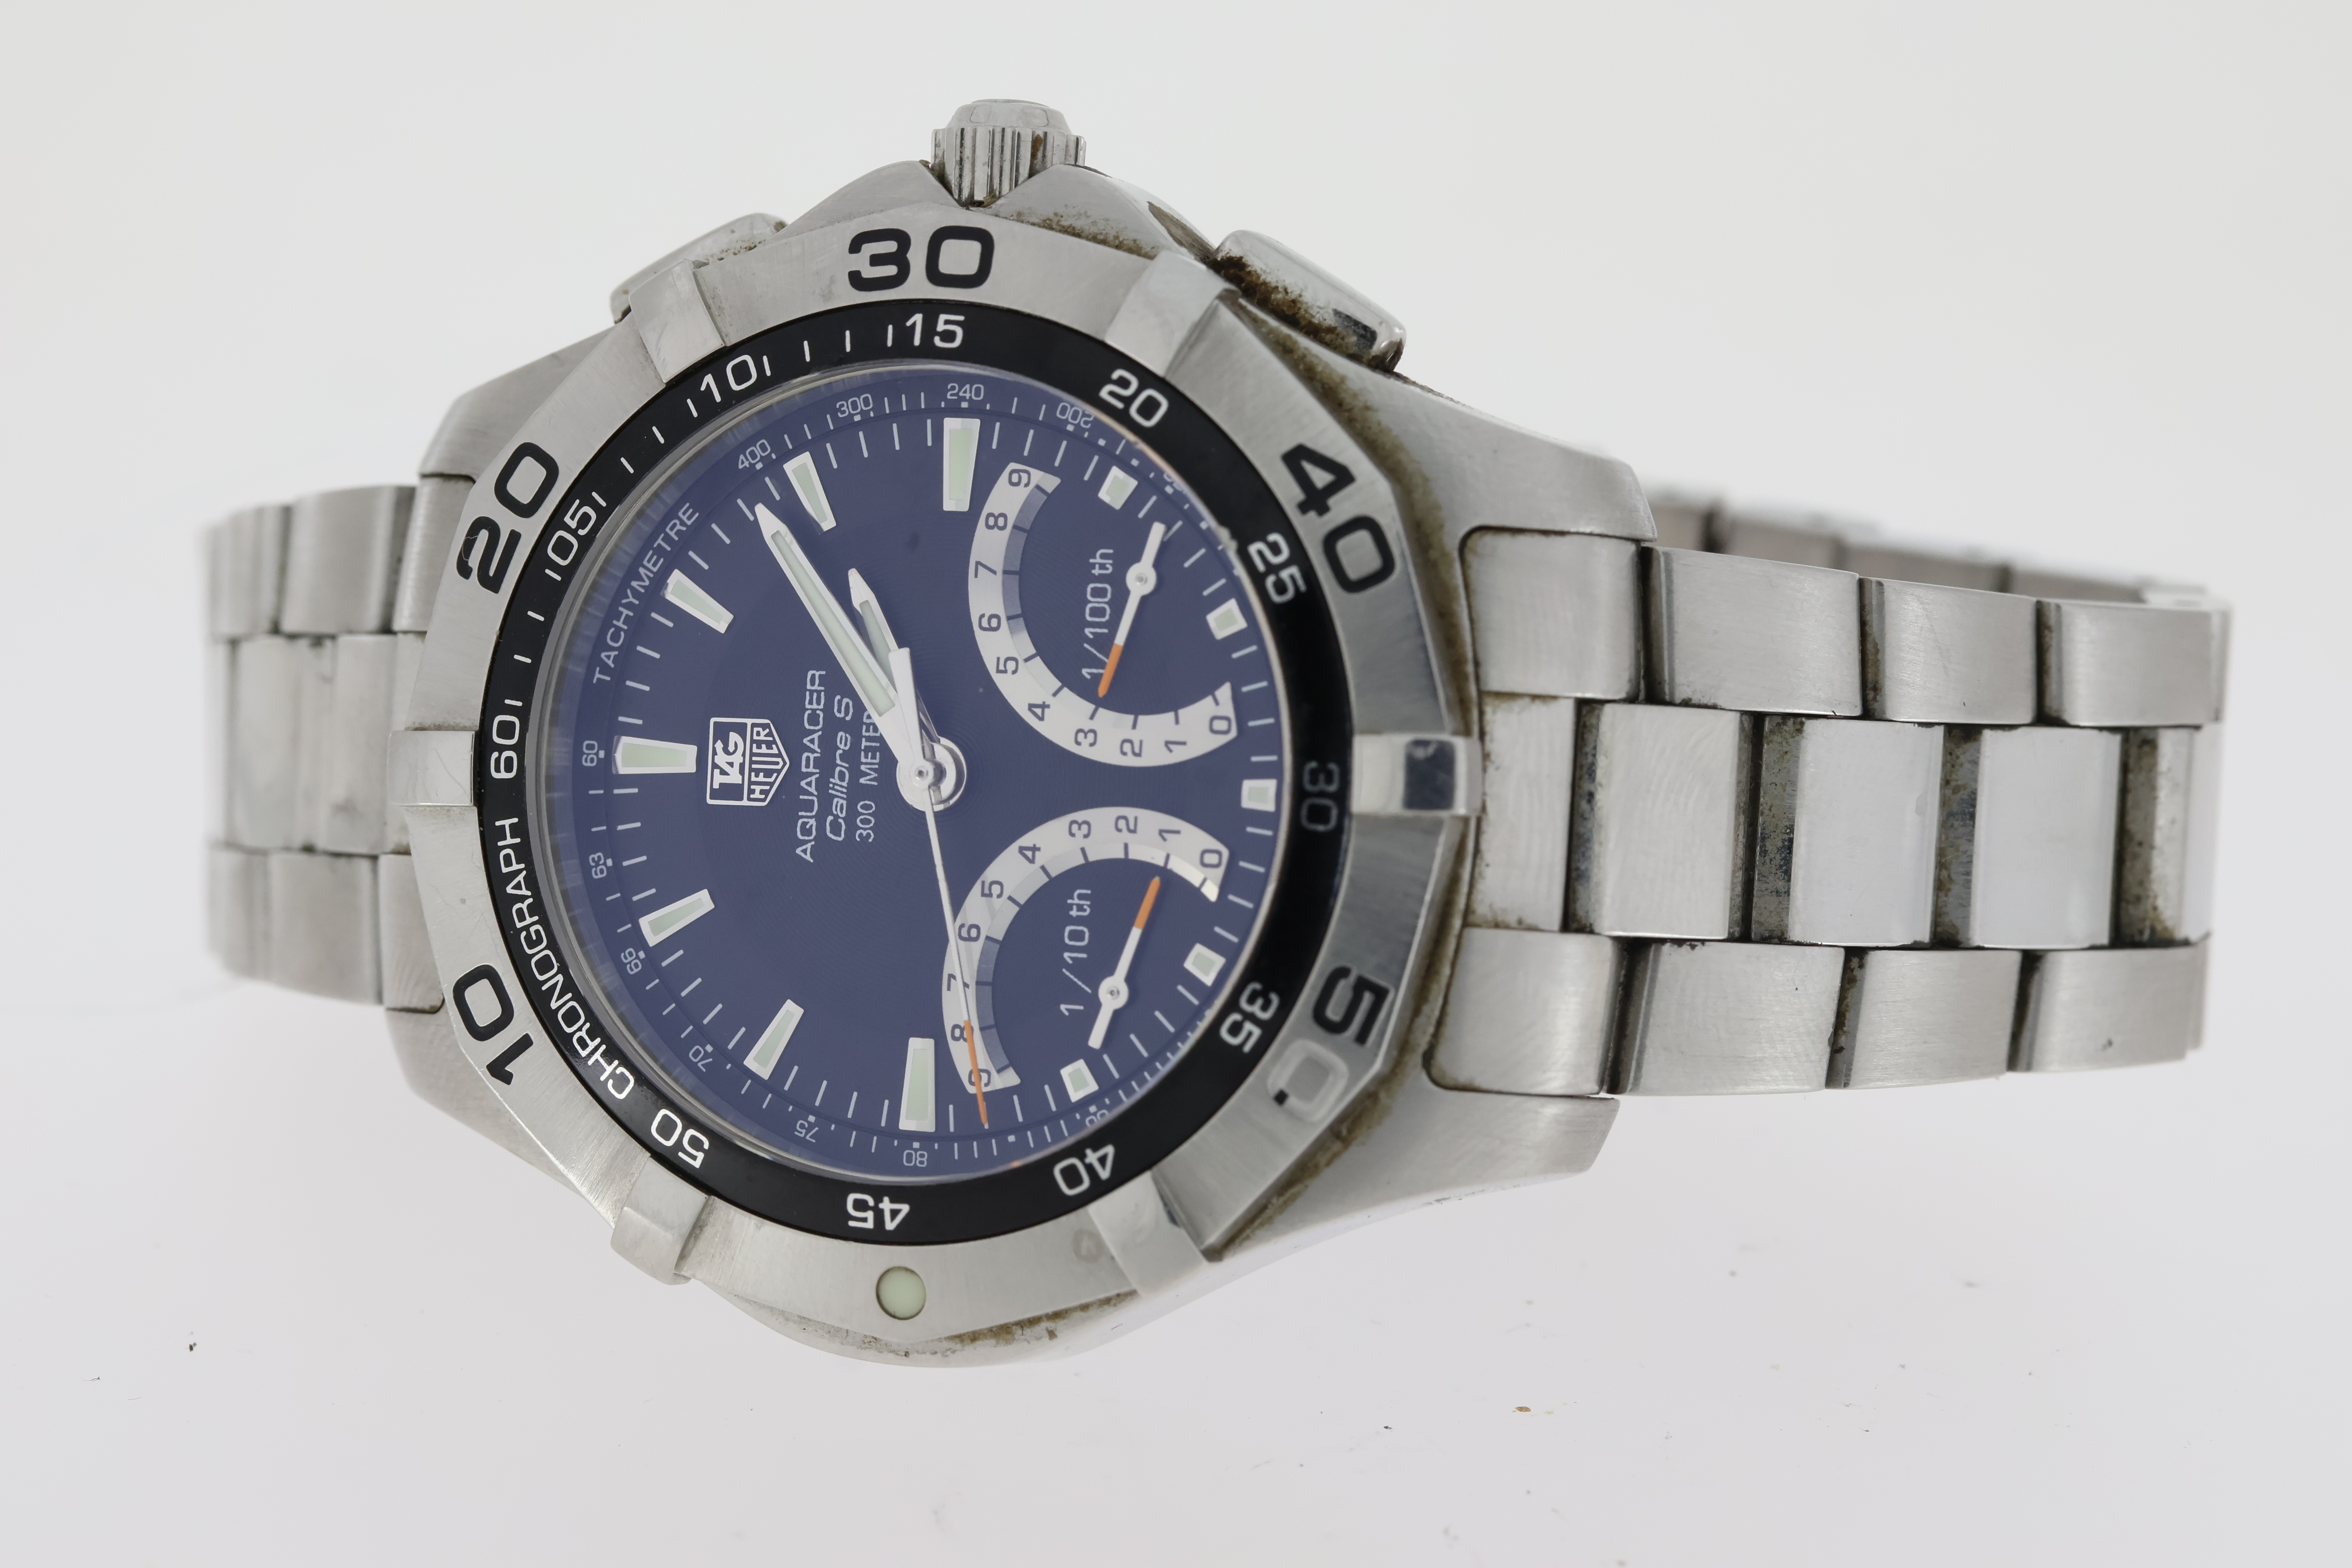 TAG HEUER AQUARACER CALIBRE S REFERENCE CAF7010 WITH BOX AND PAPERS 2014, black dial, chronograph to - Image 3 of 7